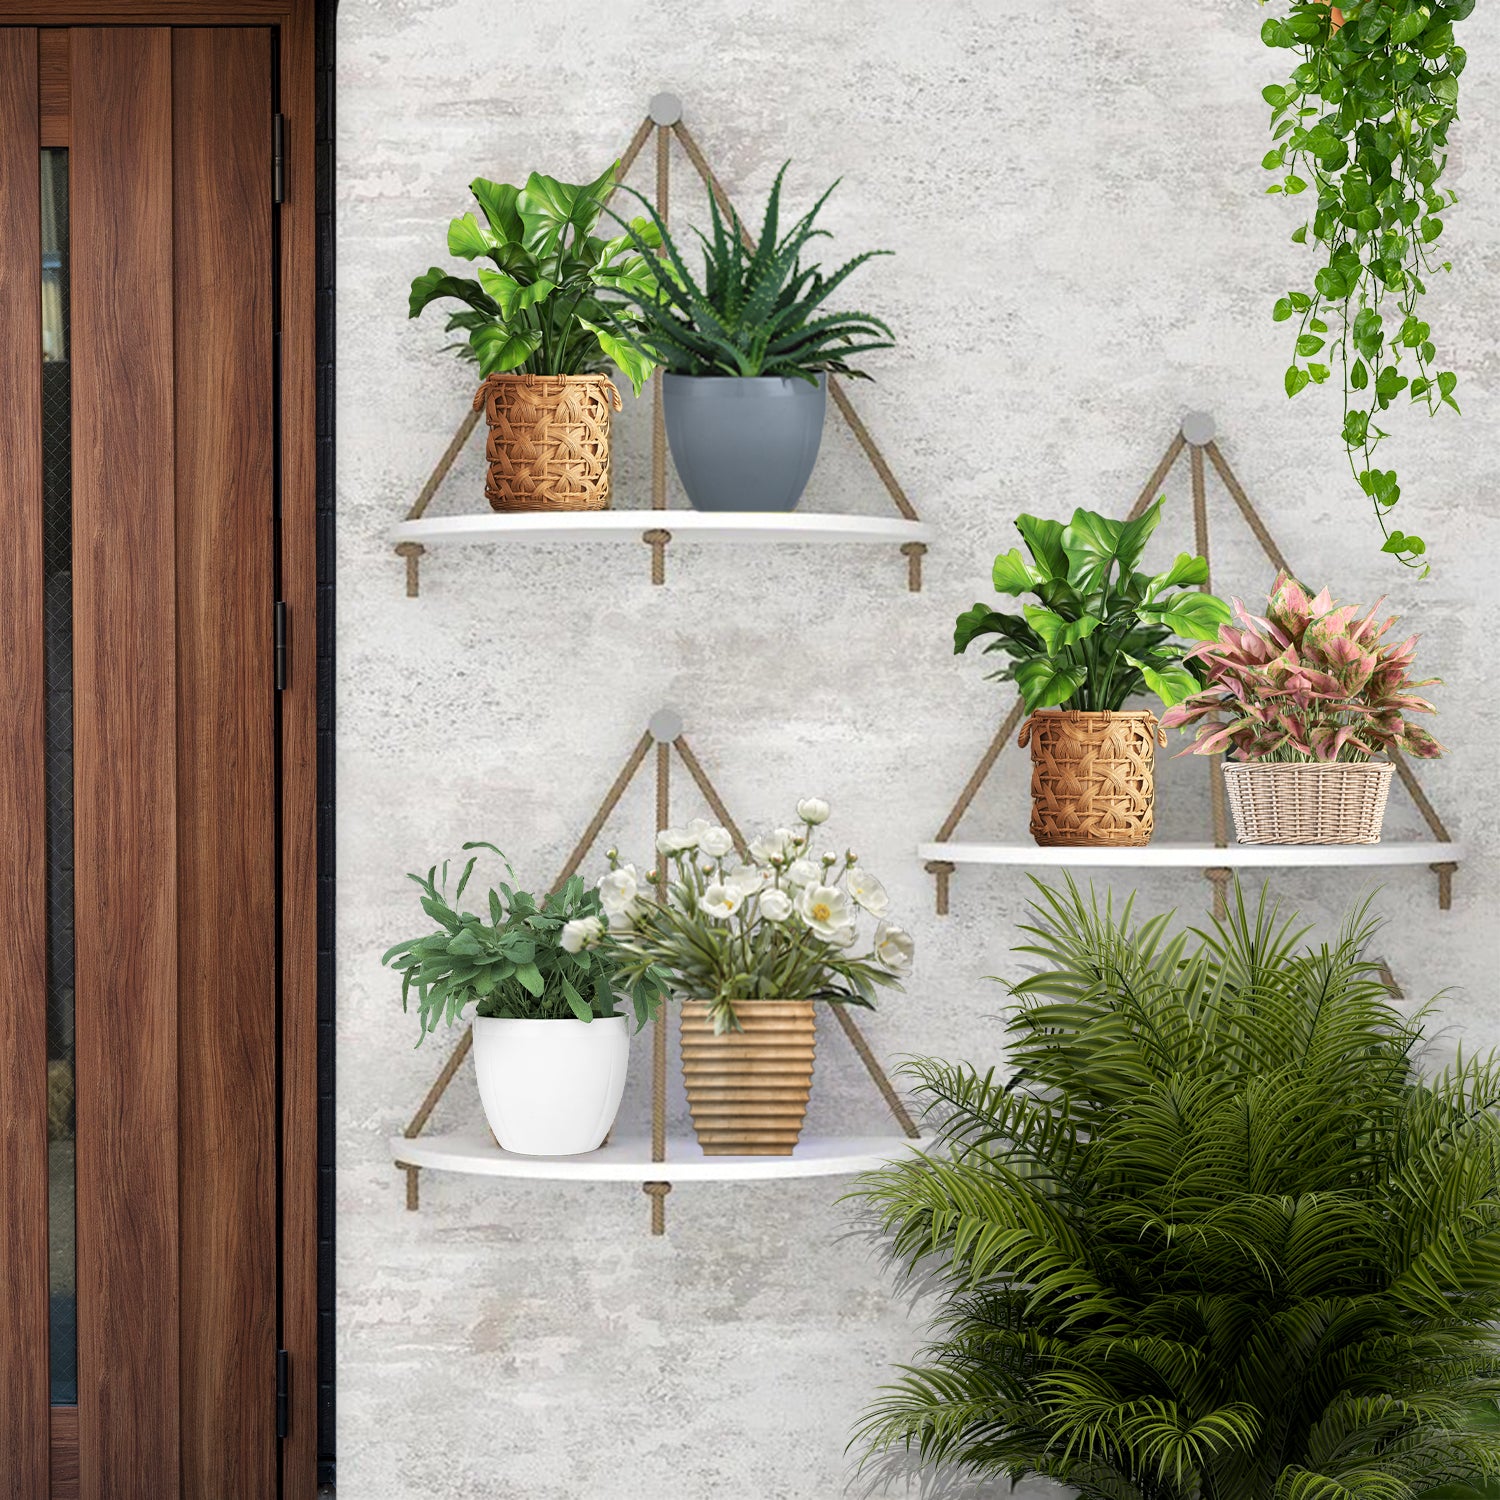 Wooden Wall Hanging Curved Shape Planter Shelf 